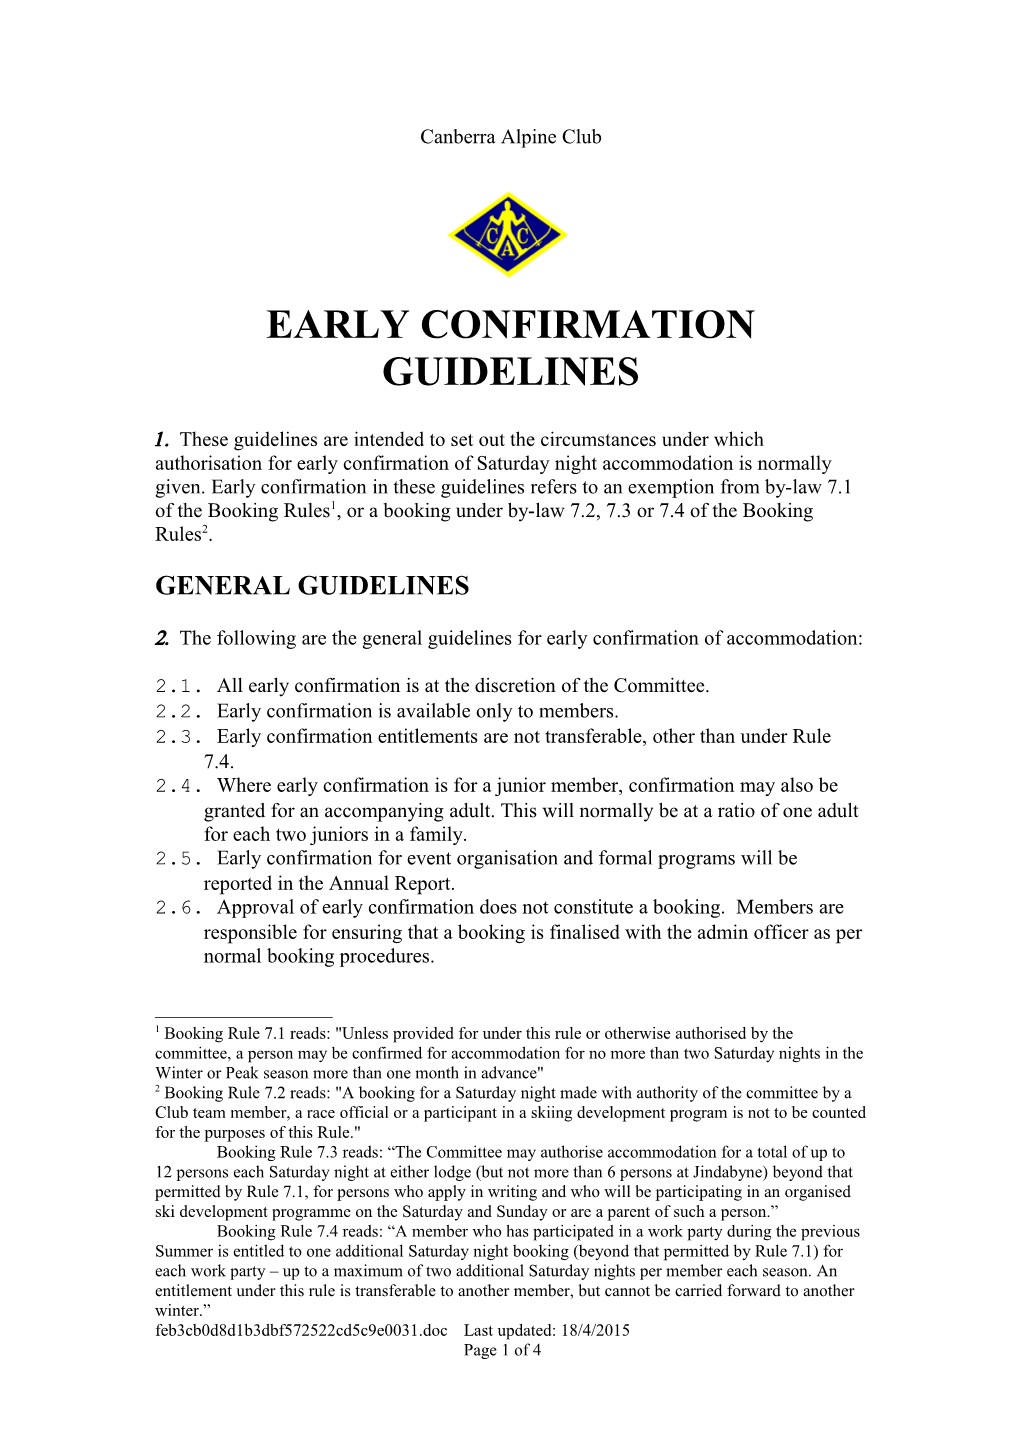 Early Confirmation Guidelines